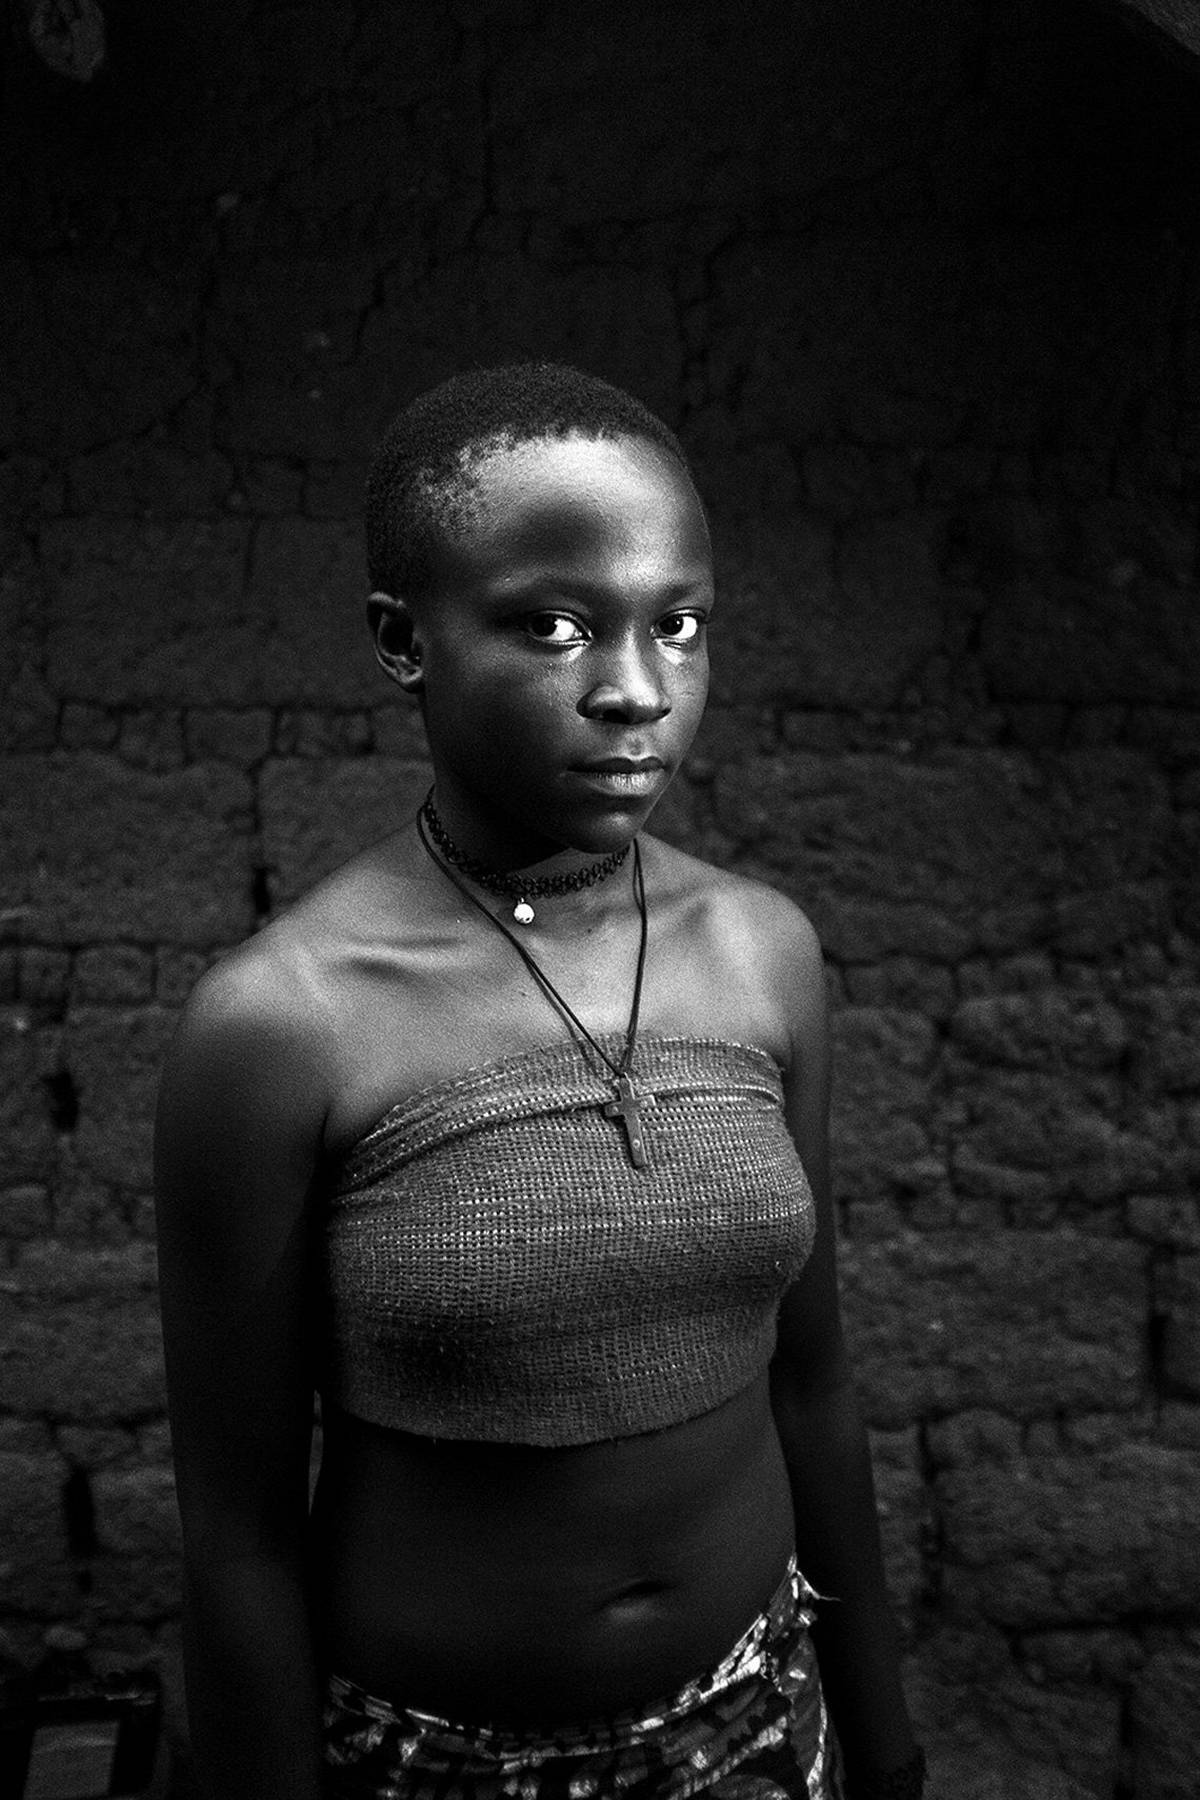 In Cameroon, Wetshibi poses for the camera after having her breasts massaged with a stone. 